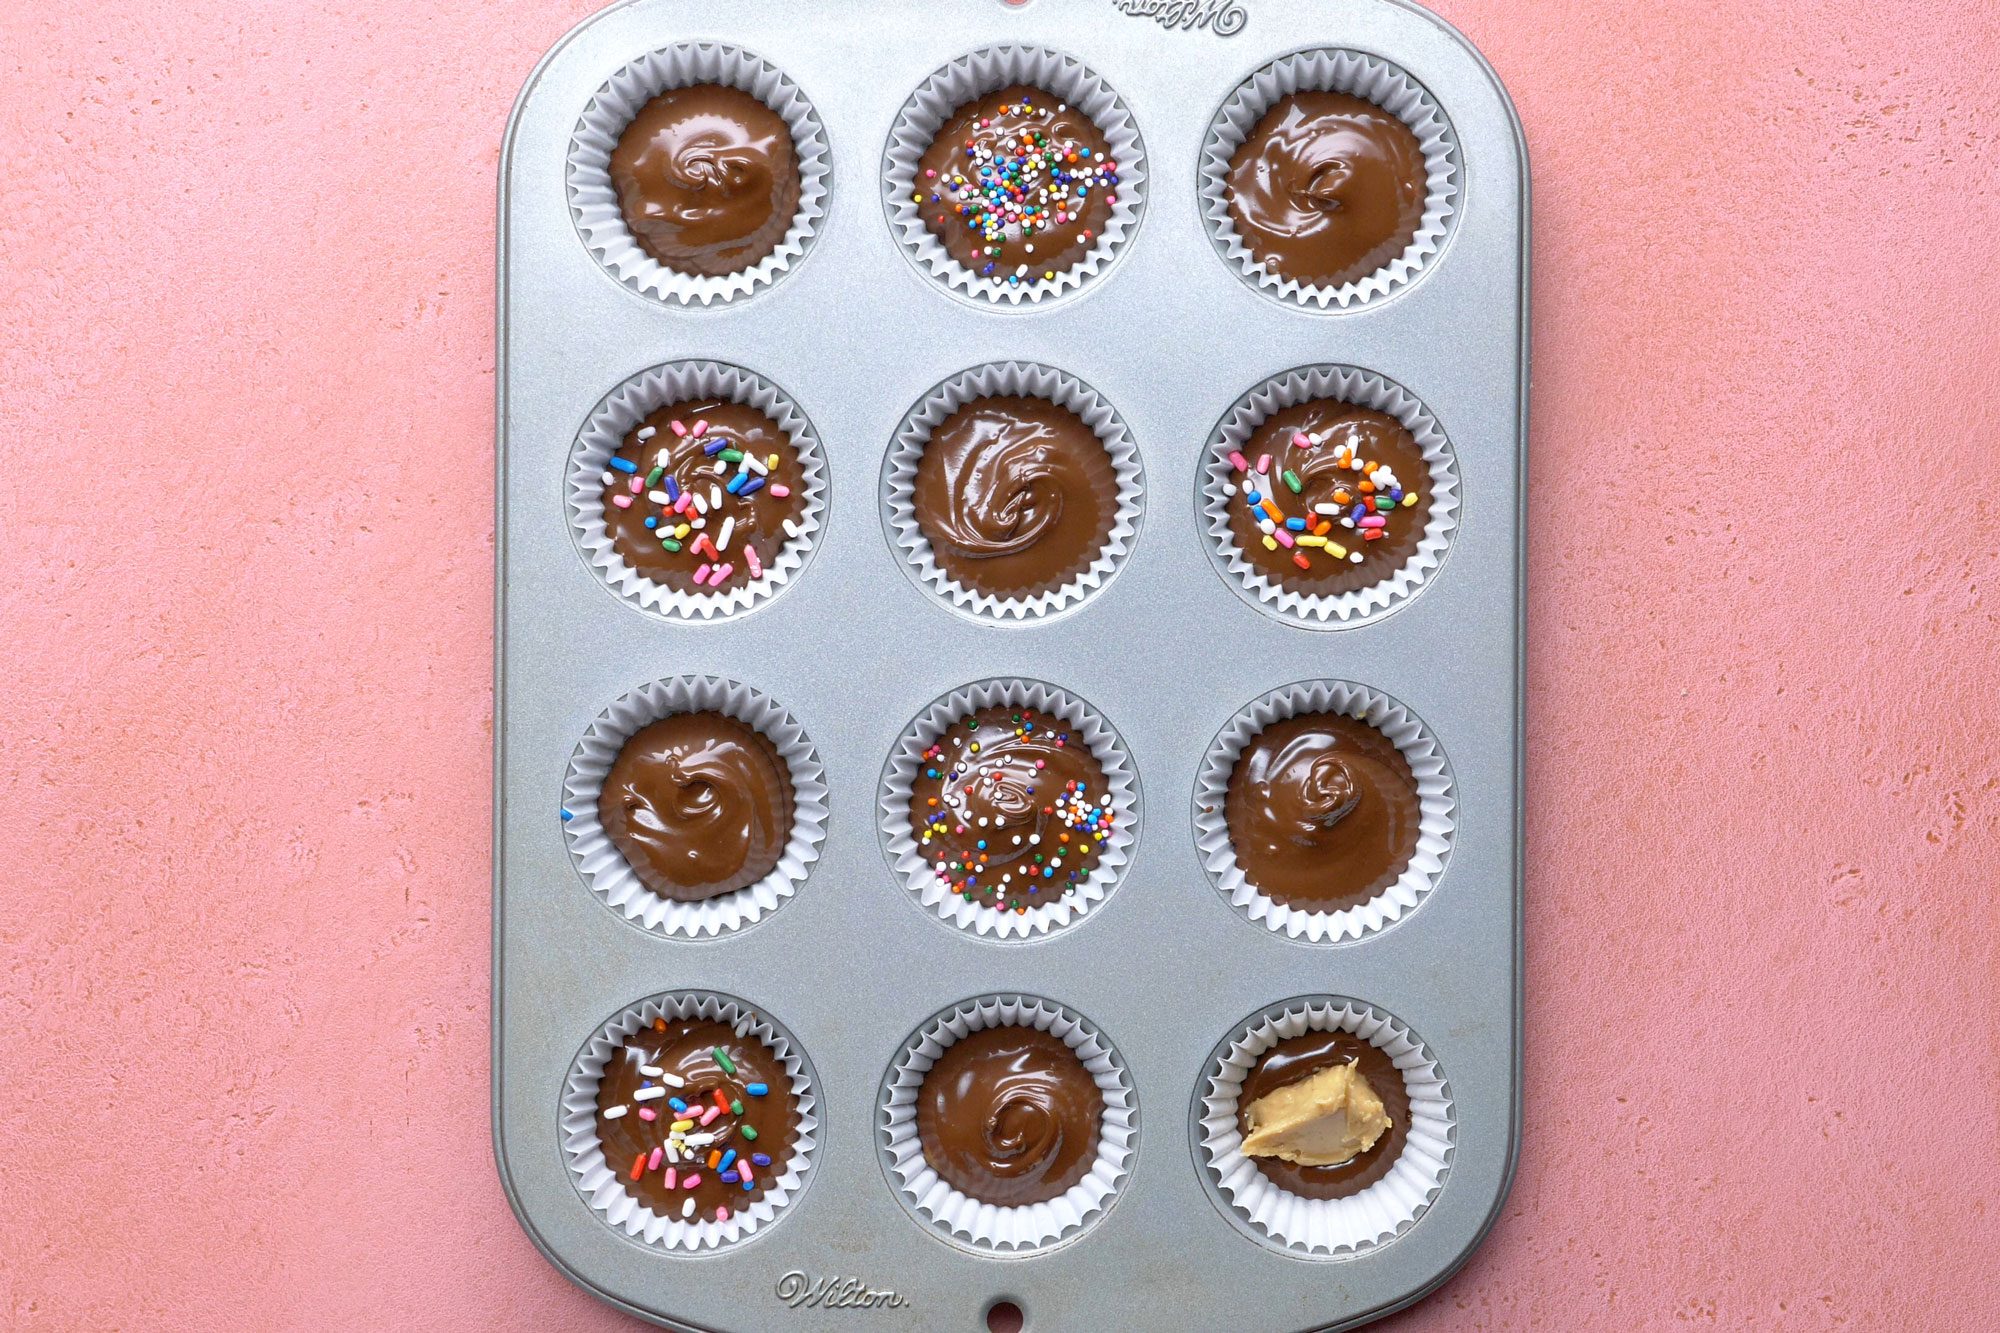 Drop the chocolate mixture into paper-lined mini muffin cups and decorate with sprinkles